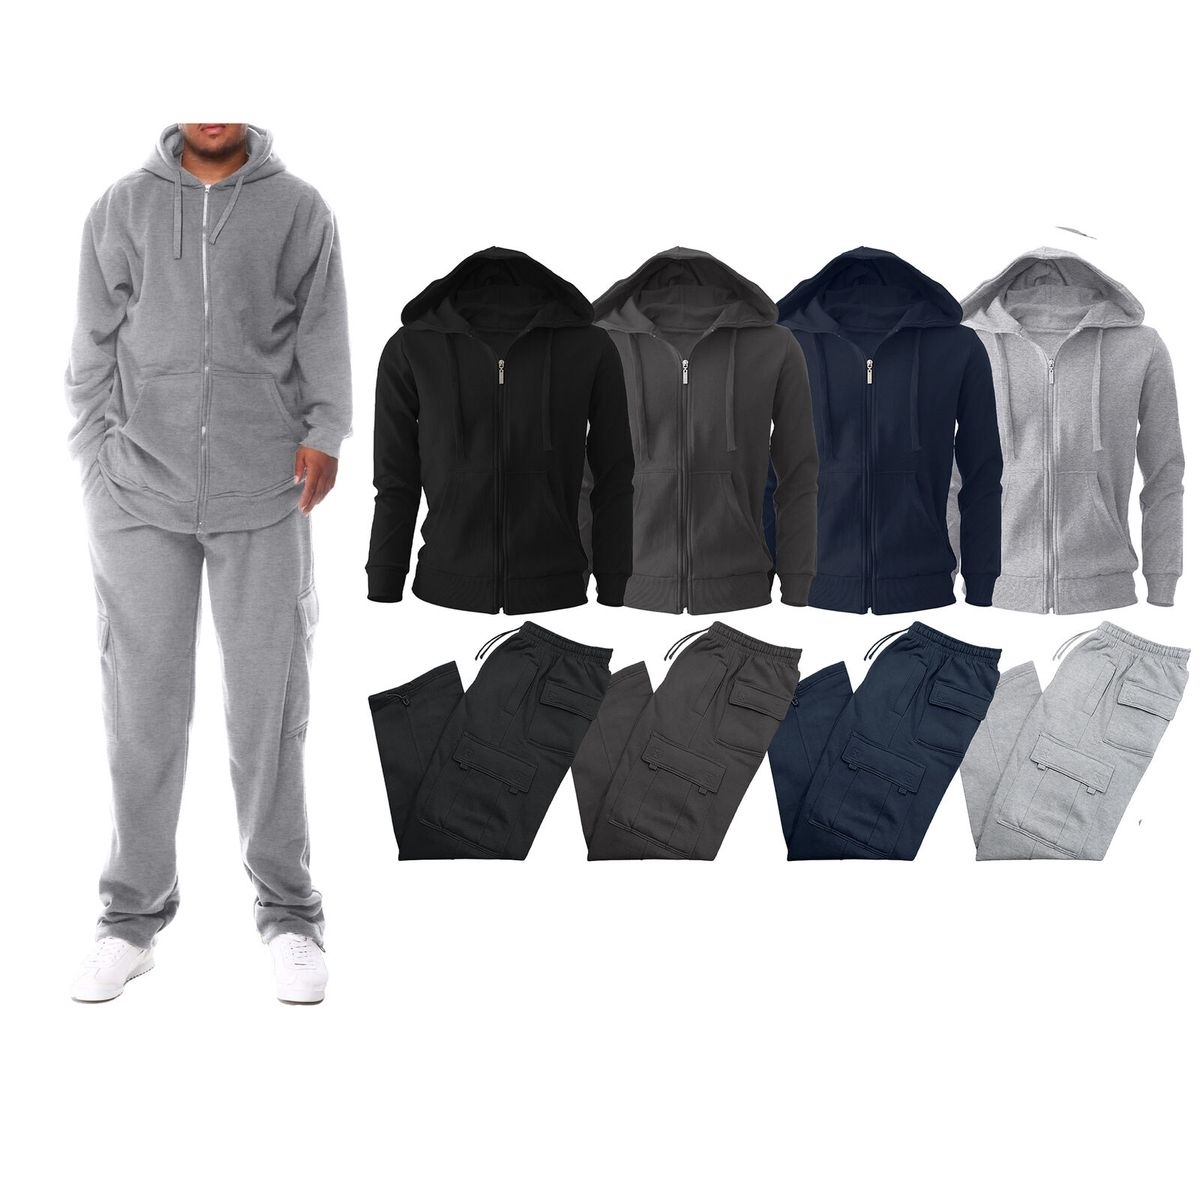 2-Pack: Men's Big & Tall Winter Warm Athletic Active Cozy Fleece Lined Multi-Pocket Full Zip Up Cargo Tracksuit - Navy, Small